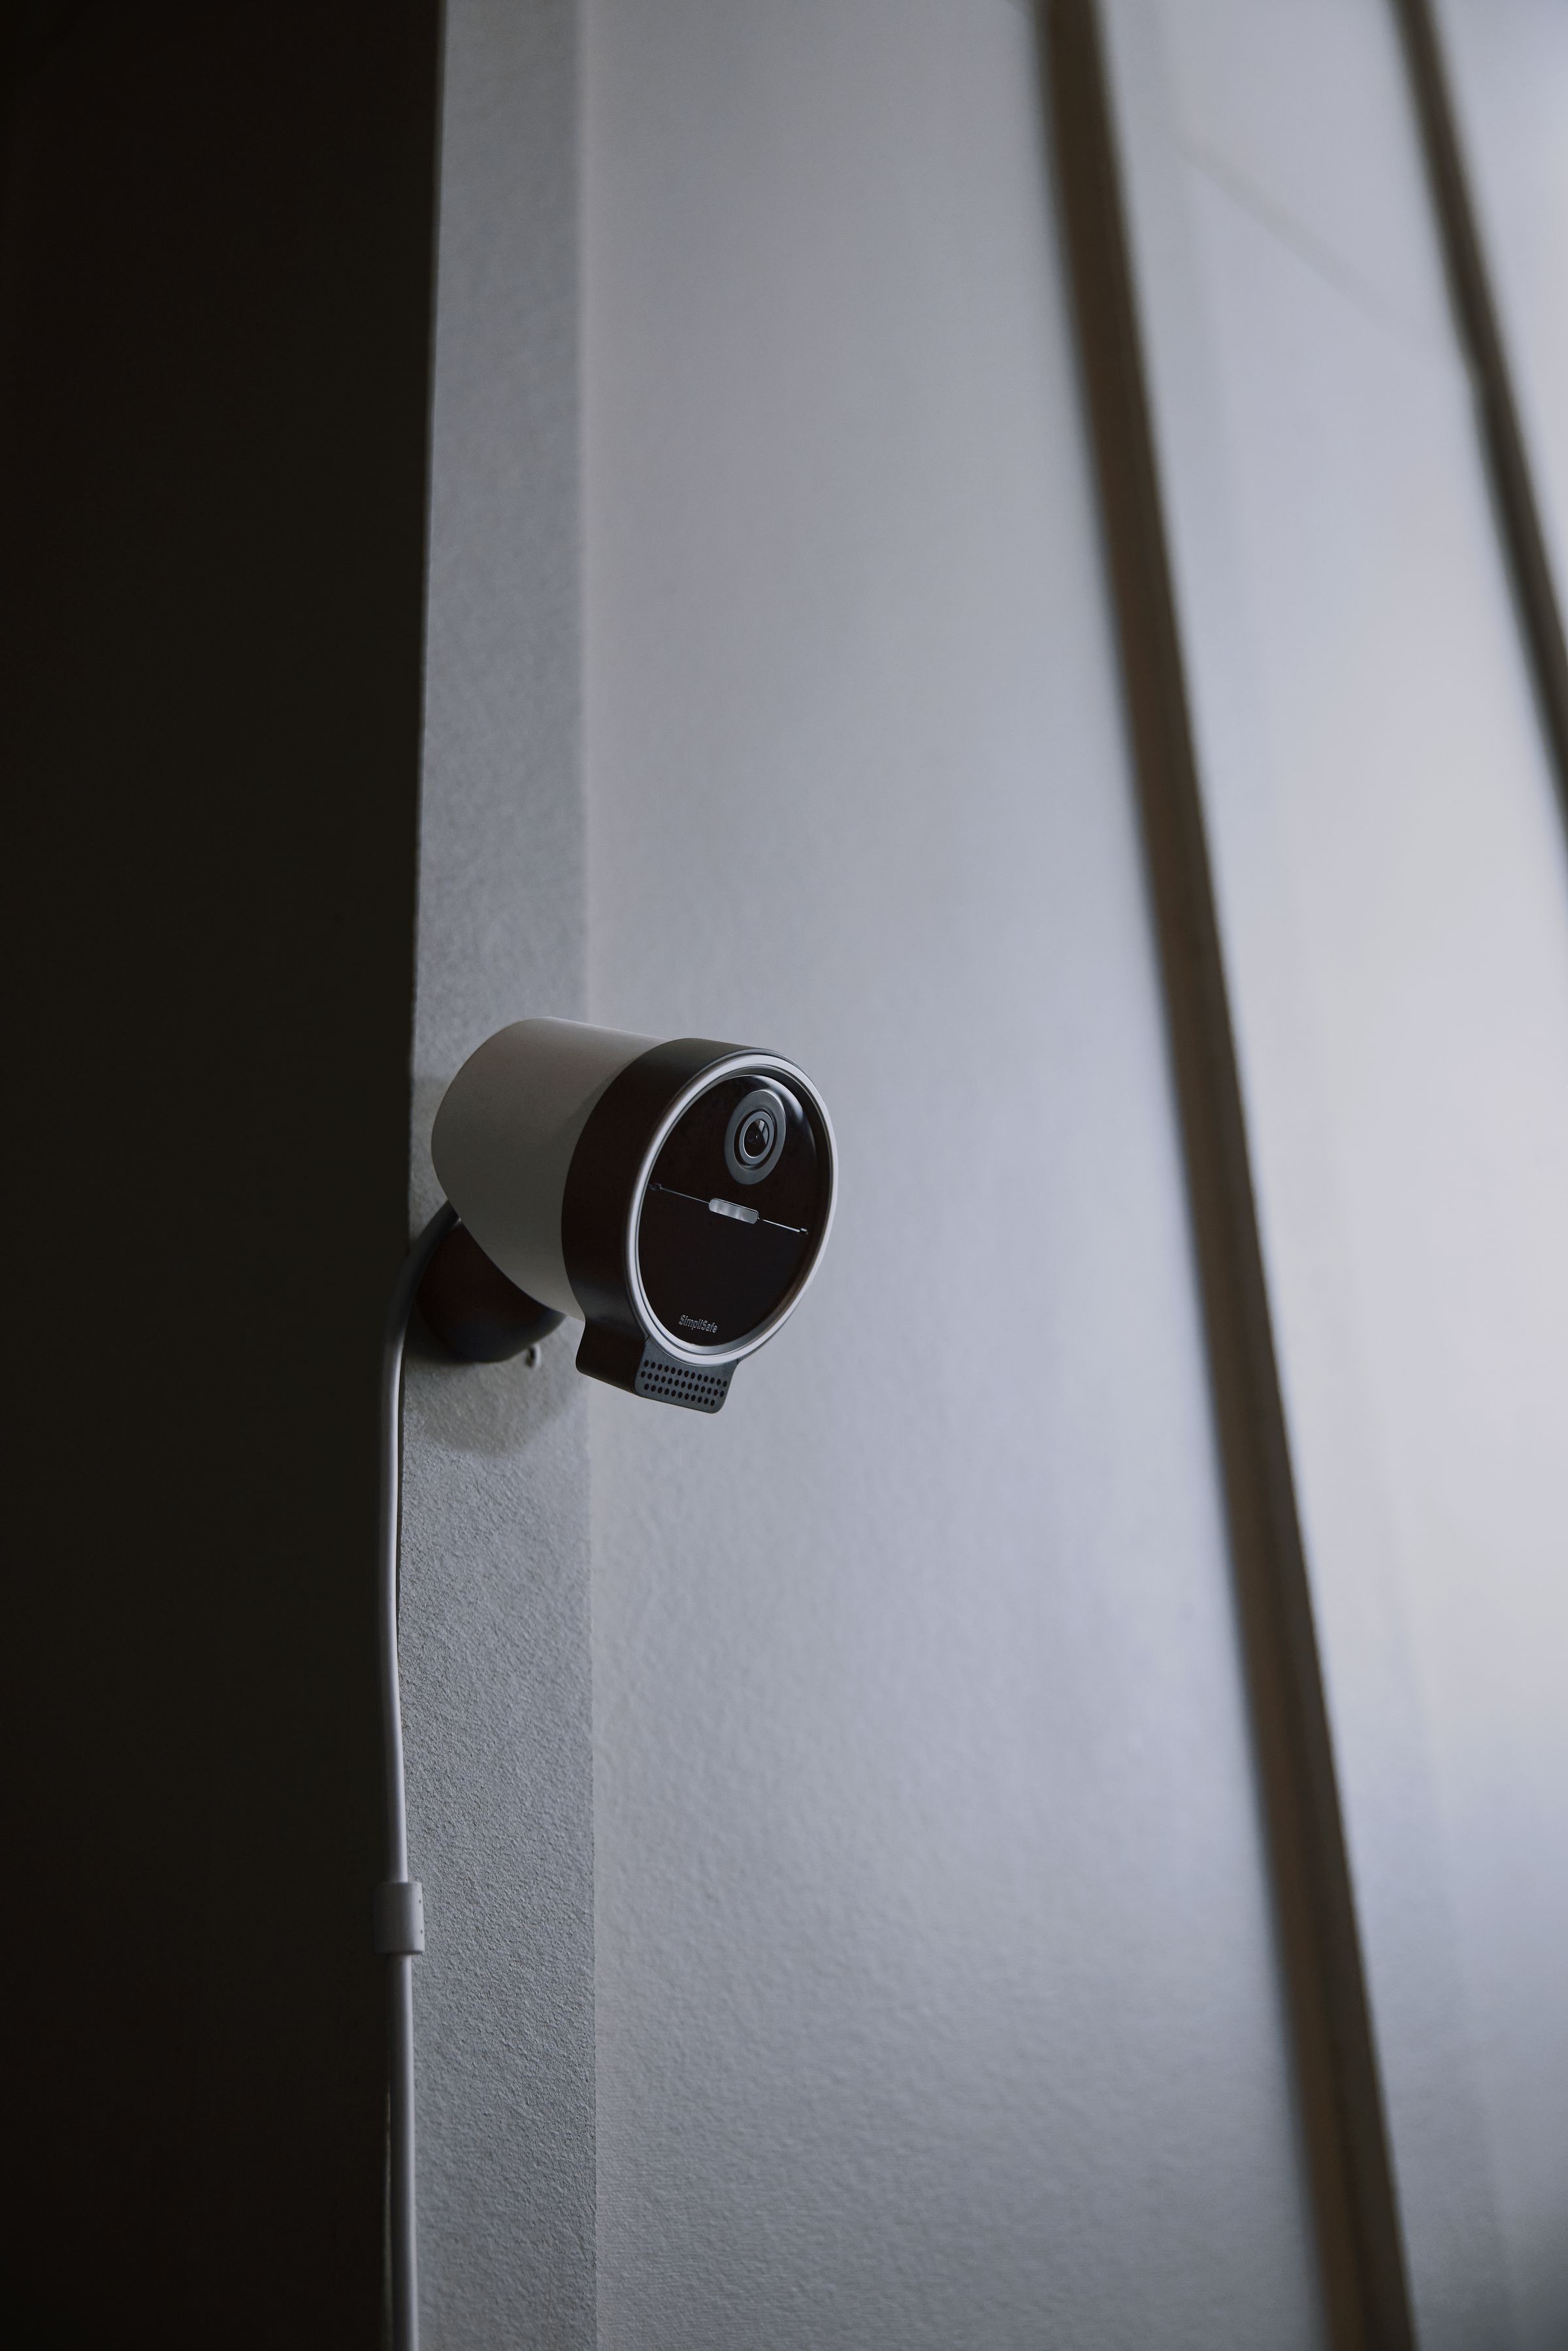 SimpliSafe’s outdoor camera works with the new live monitoring feature, but you’ll need an outdoor power cable ($30) and an audio enhancer provided by SimpliSafe (pictured). 